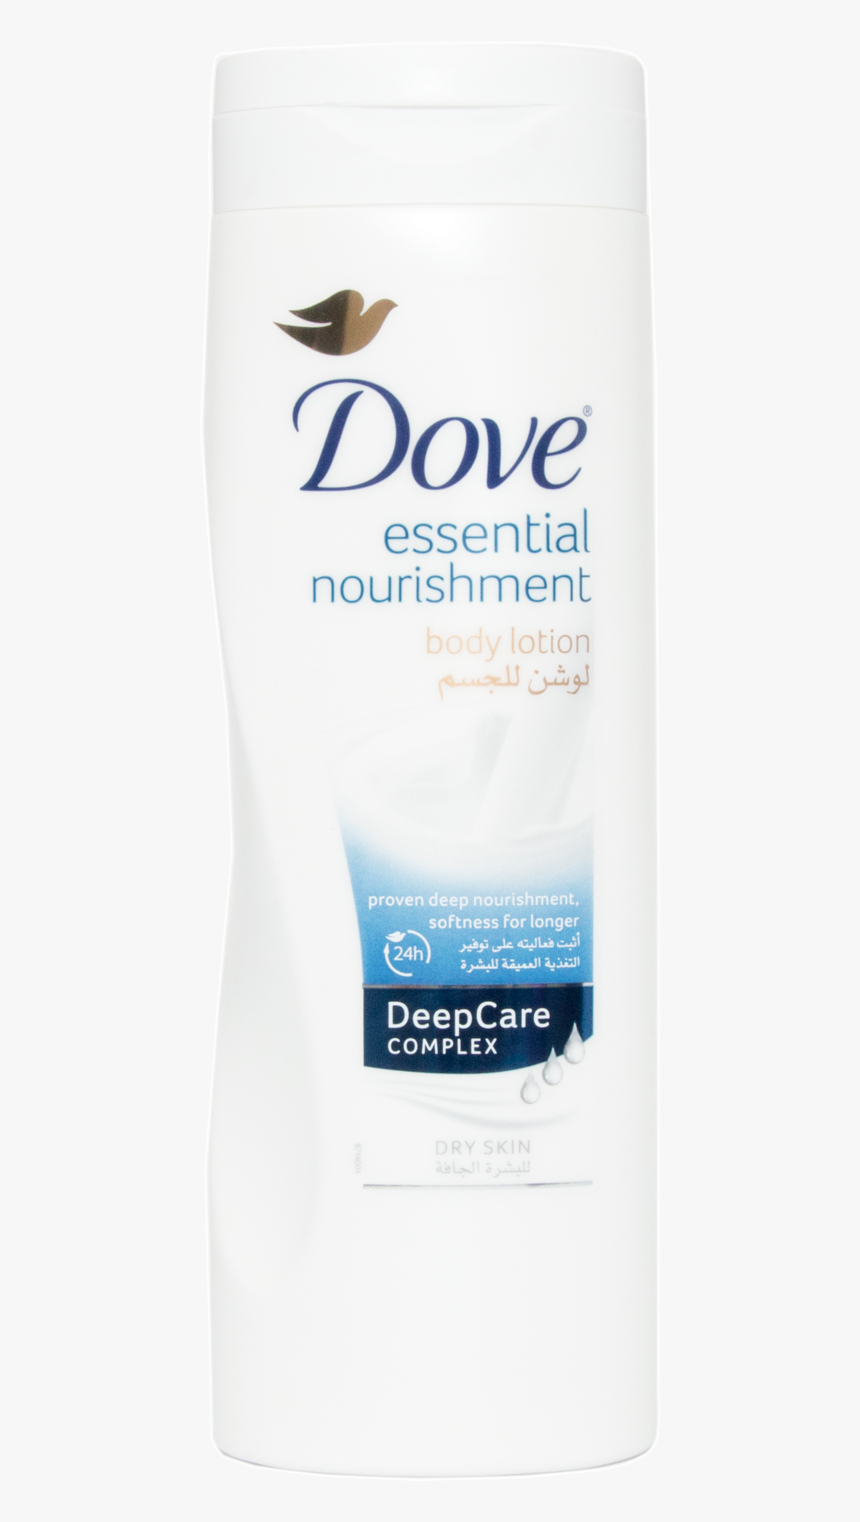 Dove Essential Body Lotion 400ml - Dove, HD Png Download, Free Download